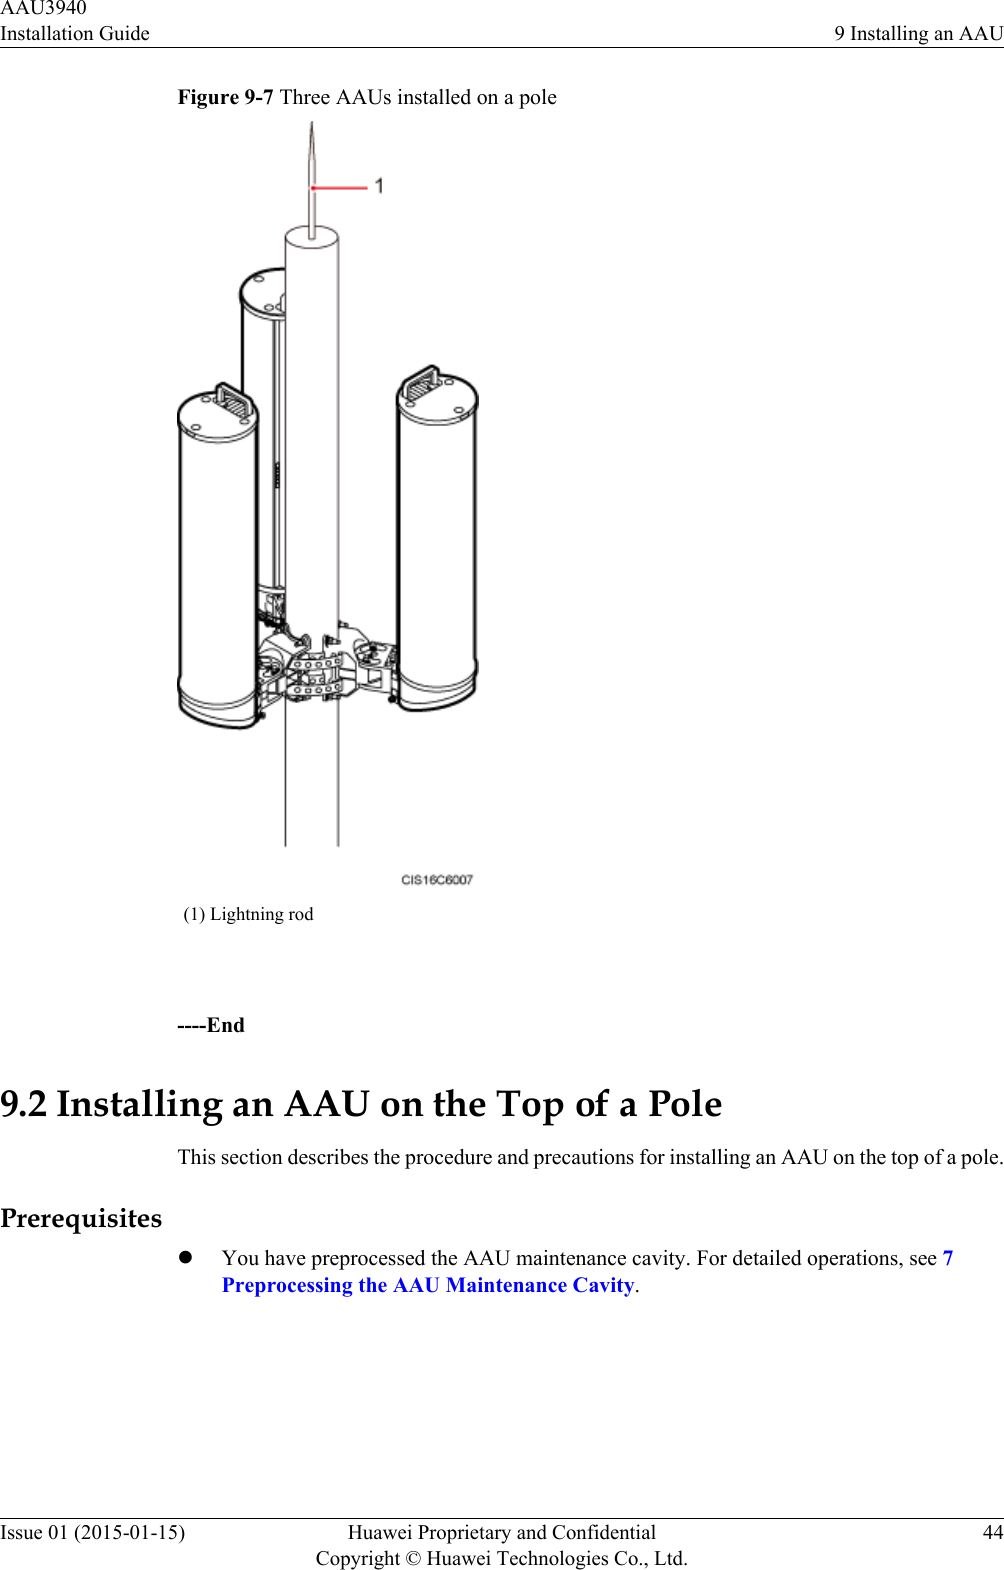 Figure 9-7 Three AAUs installed on a pole(1) Lightning rod ----End9.2 Installing an AAU on the Top of a PoleThis section describes the procedure and precautions for installing an AAU on the top of a pole.PrerequisiteslYou have preprocessed the AAU maintenance cavity. For detailed operations, see 7Preprocessing the AAU Maintenance Cavity.AAU3940Installation Guide 9 Installing an AAUIssue 01 (2015-01-15) Huawei Proprietary and ConfidentialCopyright © Huawei Technologies Co., Ltd.44